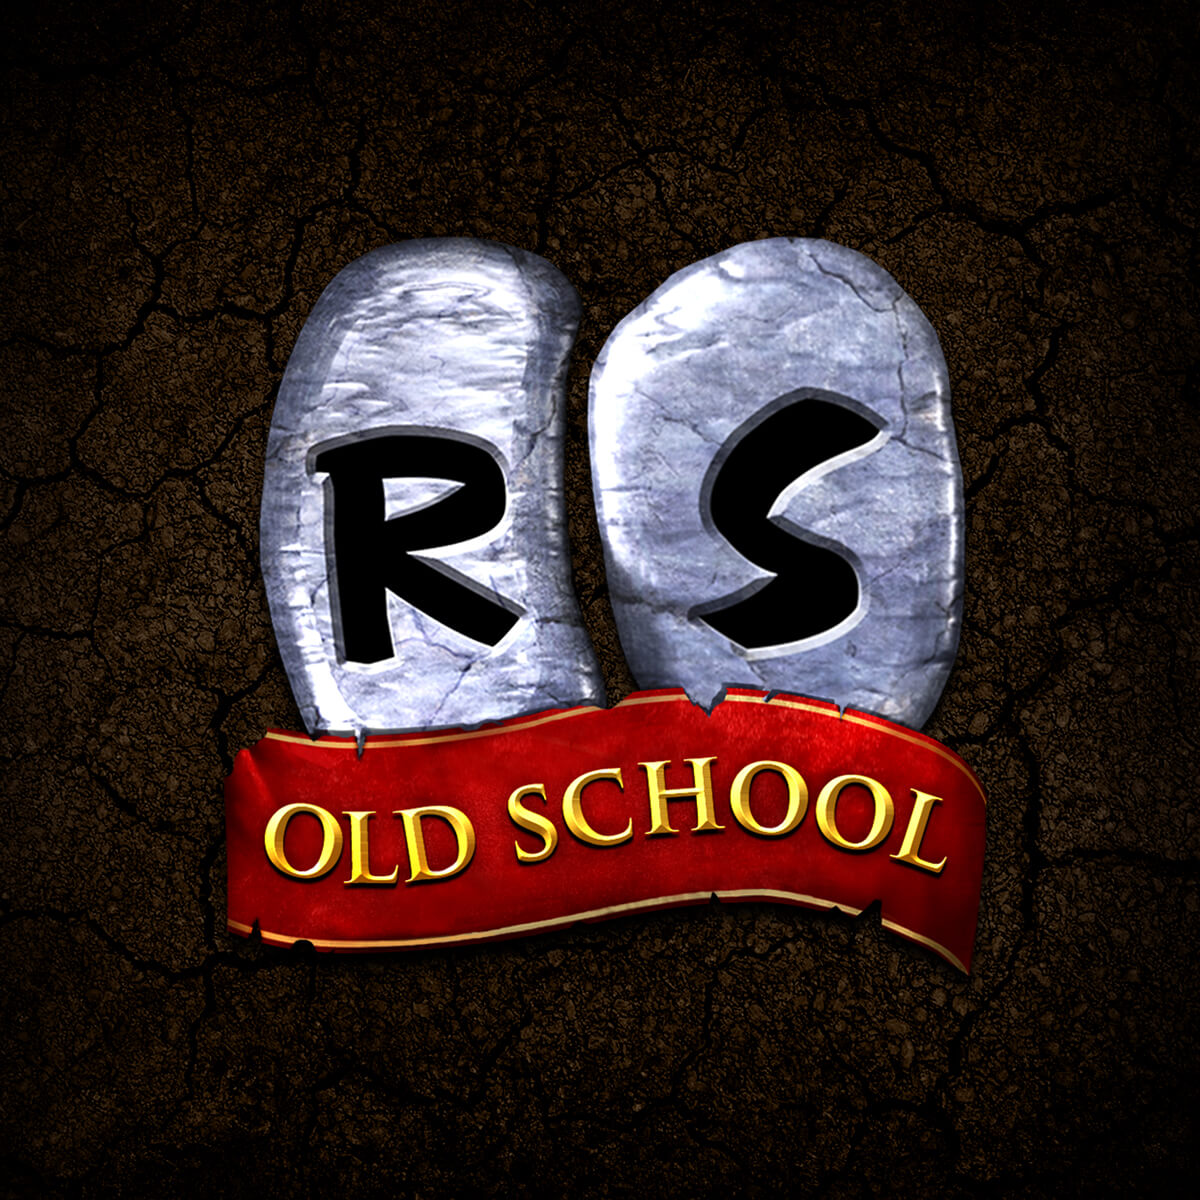 old school runescape game client install